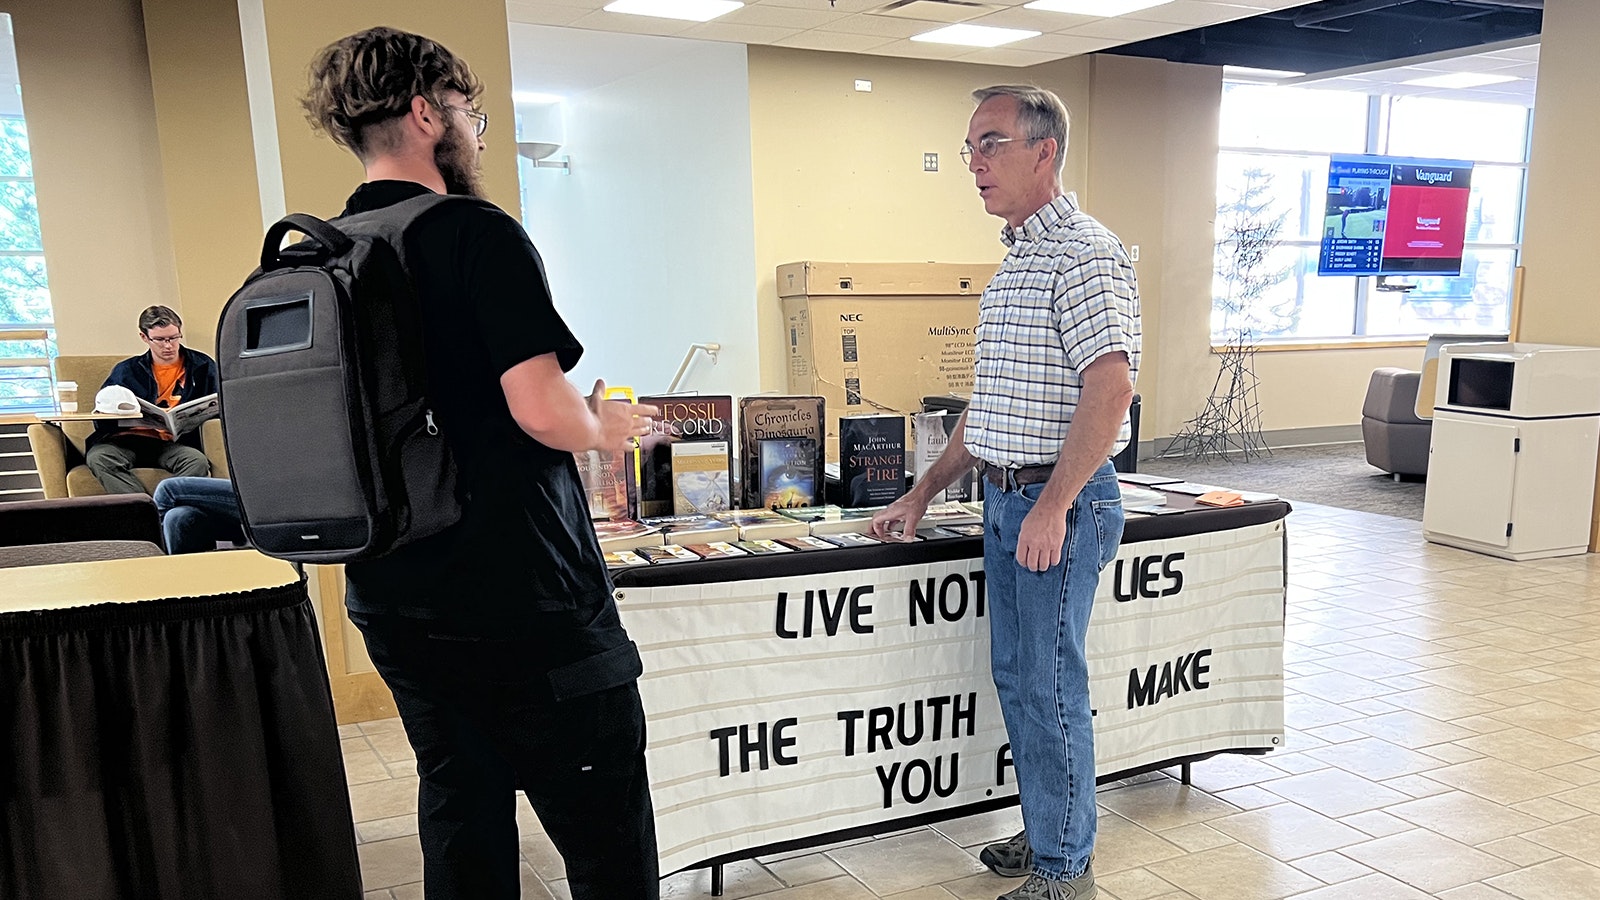 Laramie church elder Todd Schmidt debates religious themes and ideas with a University of Wyoming student recently in the Wyoming Union. Schmidt had been banned from having his table there for a year, but a recent court ruling lifted the ban and he's returned, setting his table up every Friday from 9 a.m. to 5 p.m.